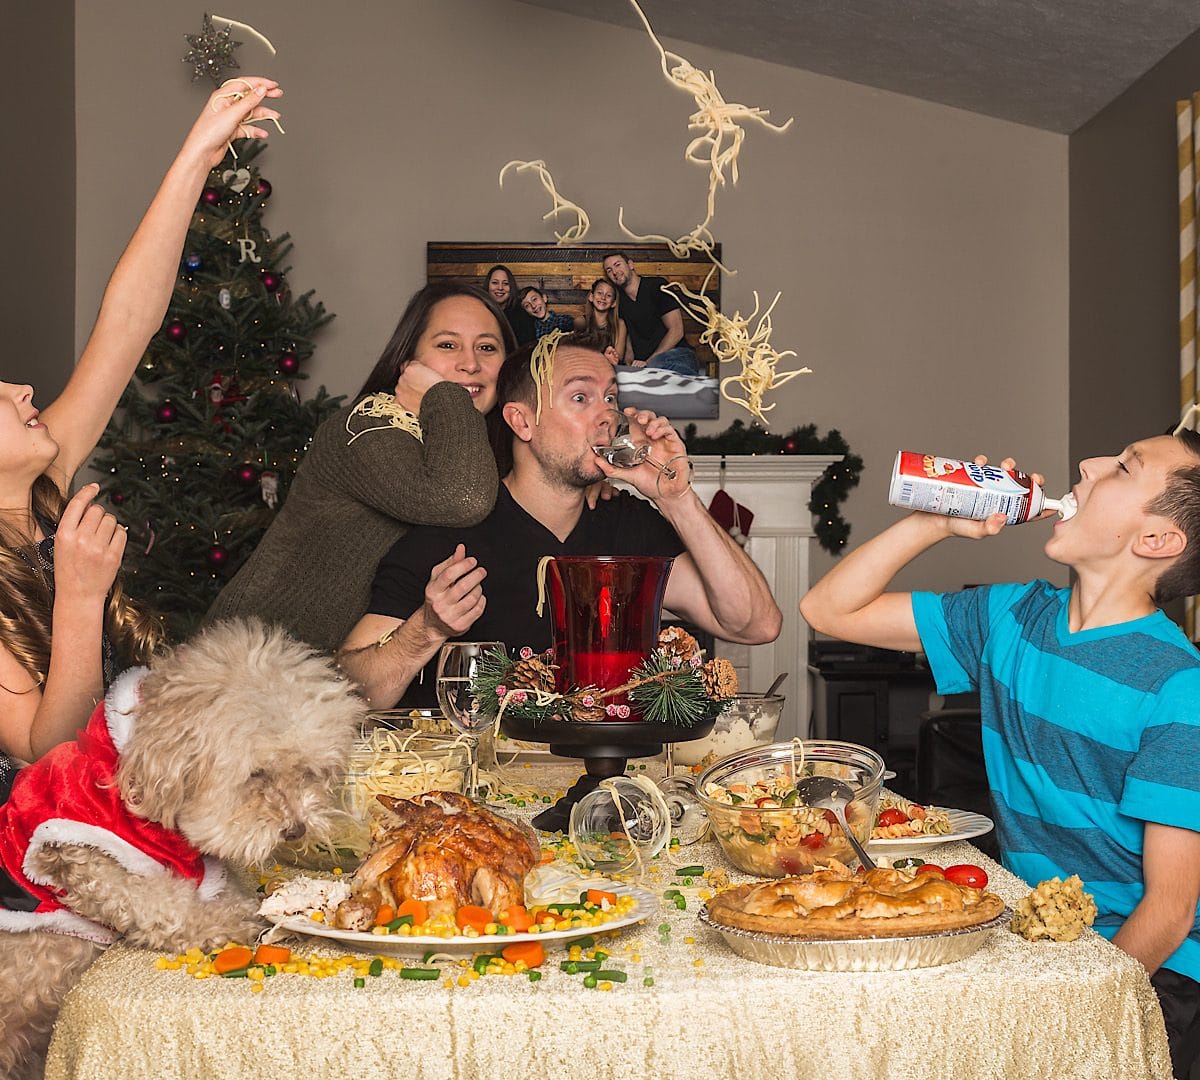 6 Tips For Visiting Family And Dealing With In-Laws Over The Holidays